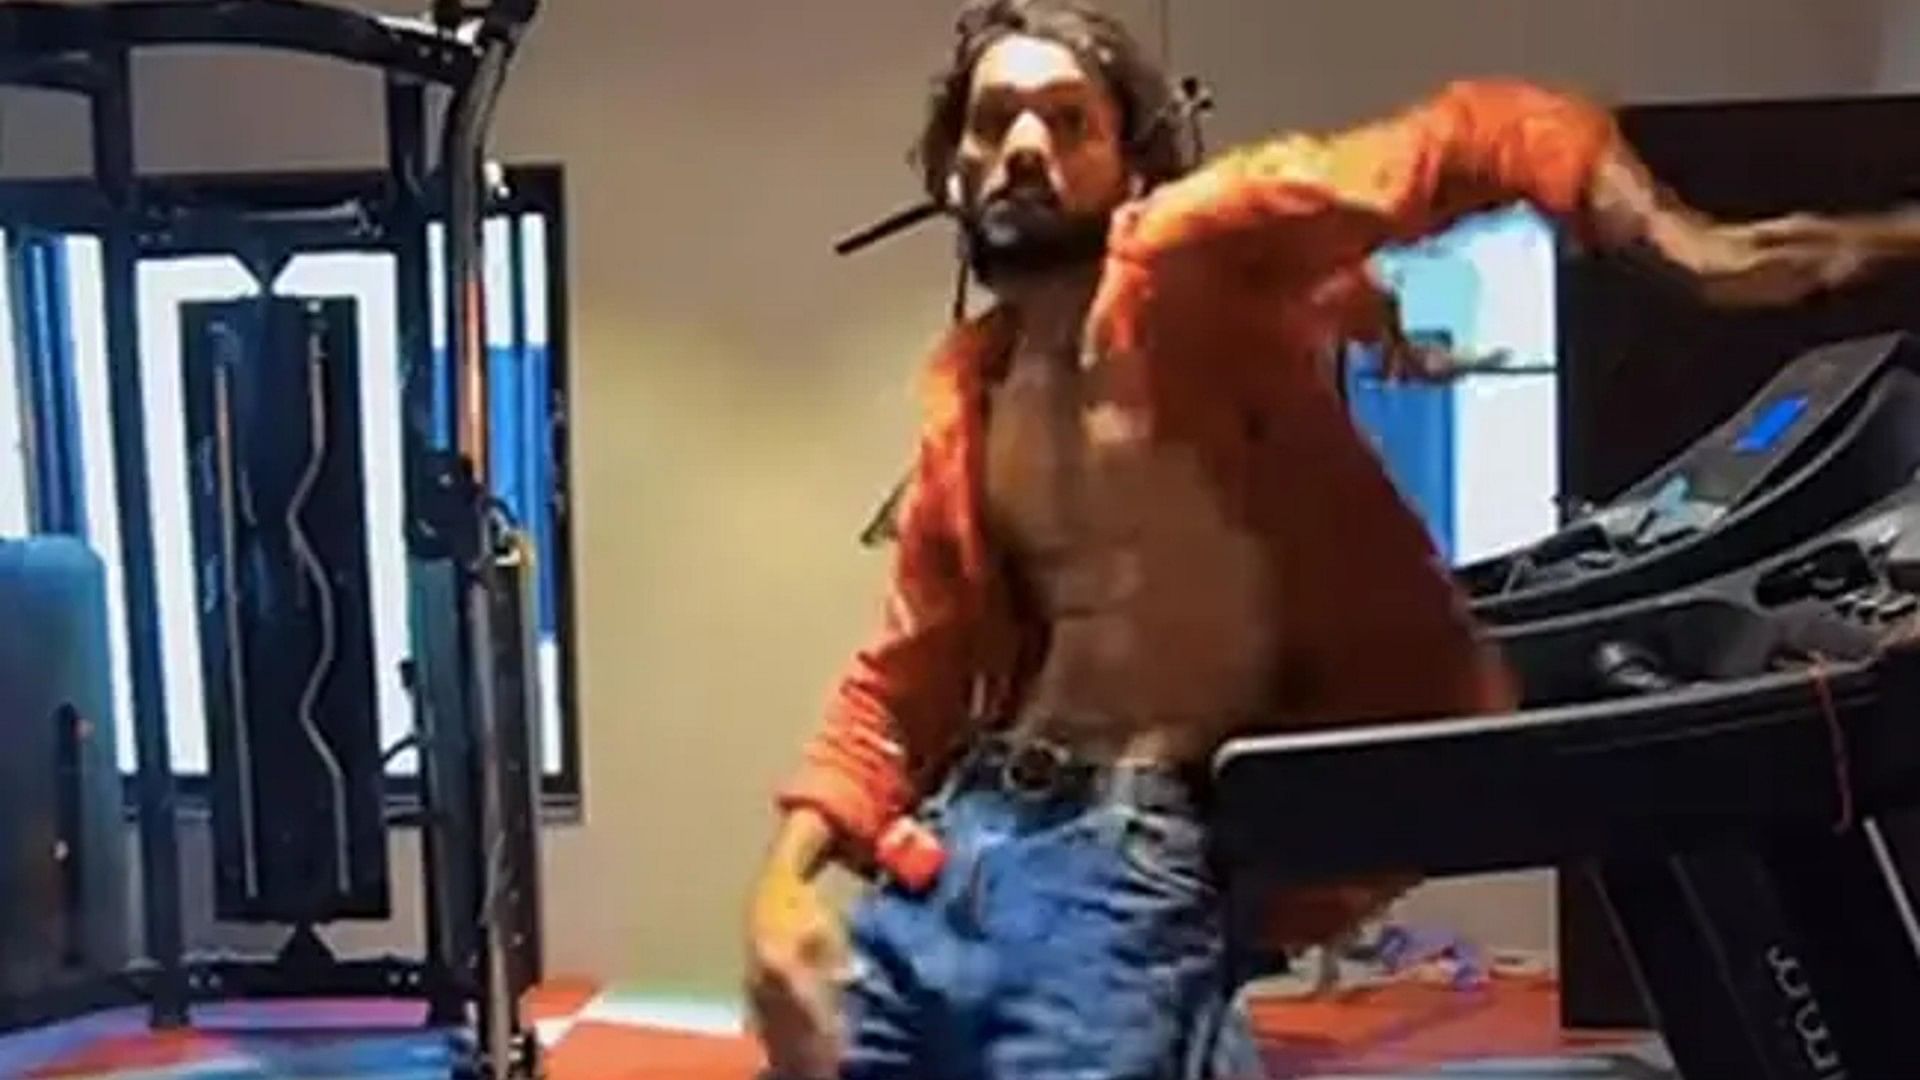 Trending Video: Person did tremendous dance on the song Hay Rama on treadmill